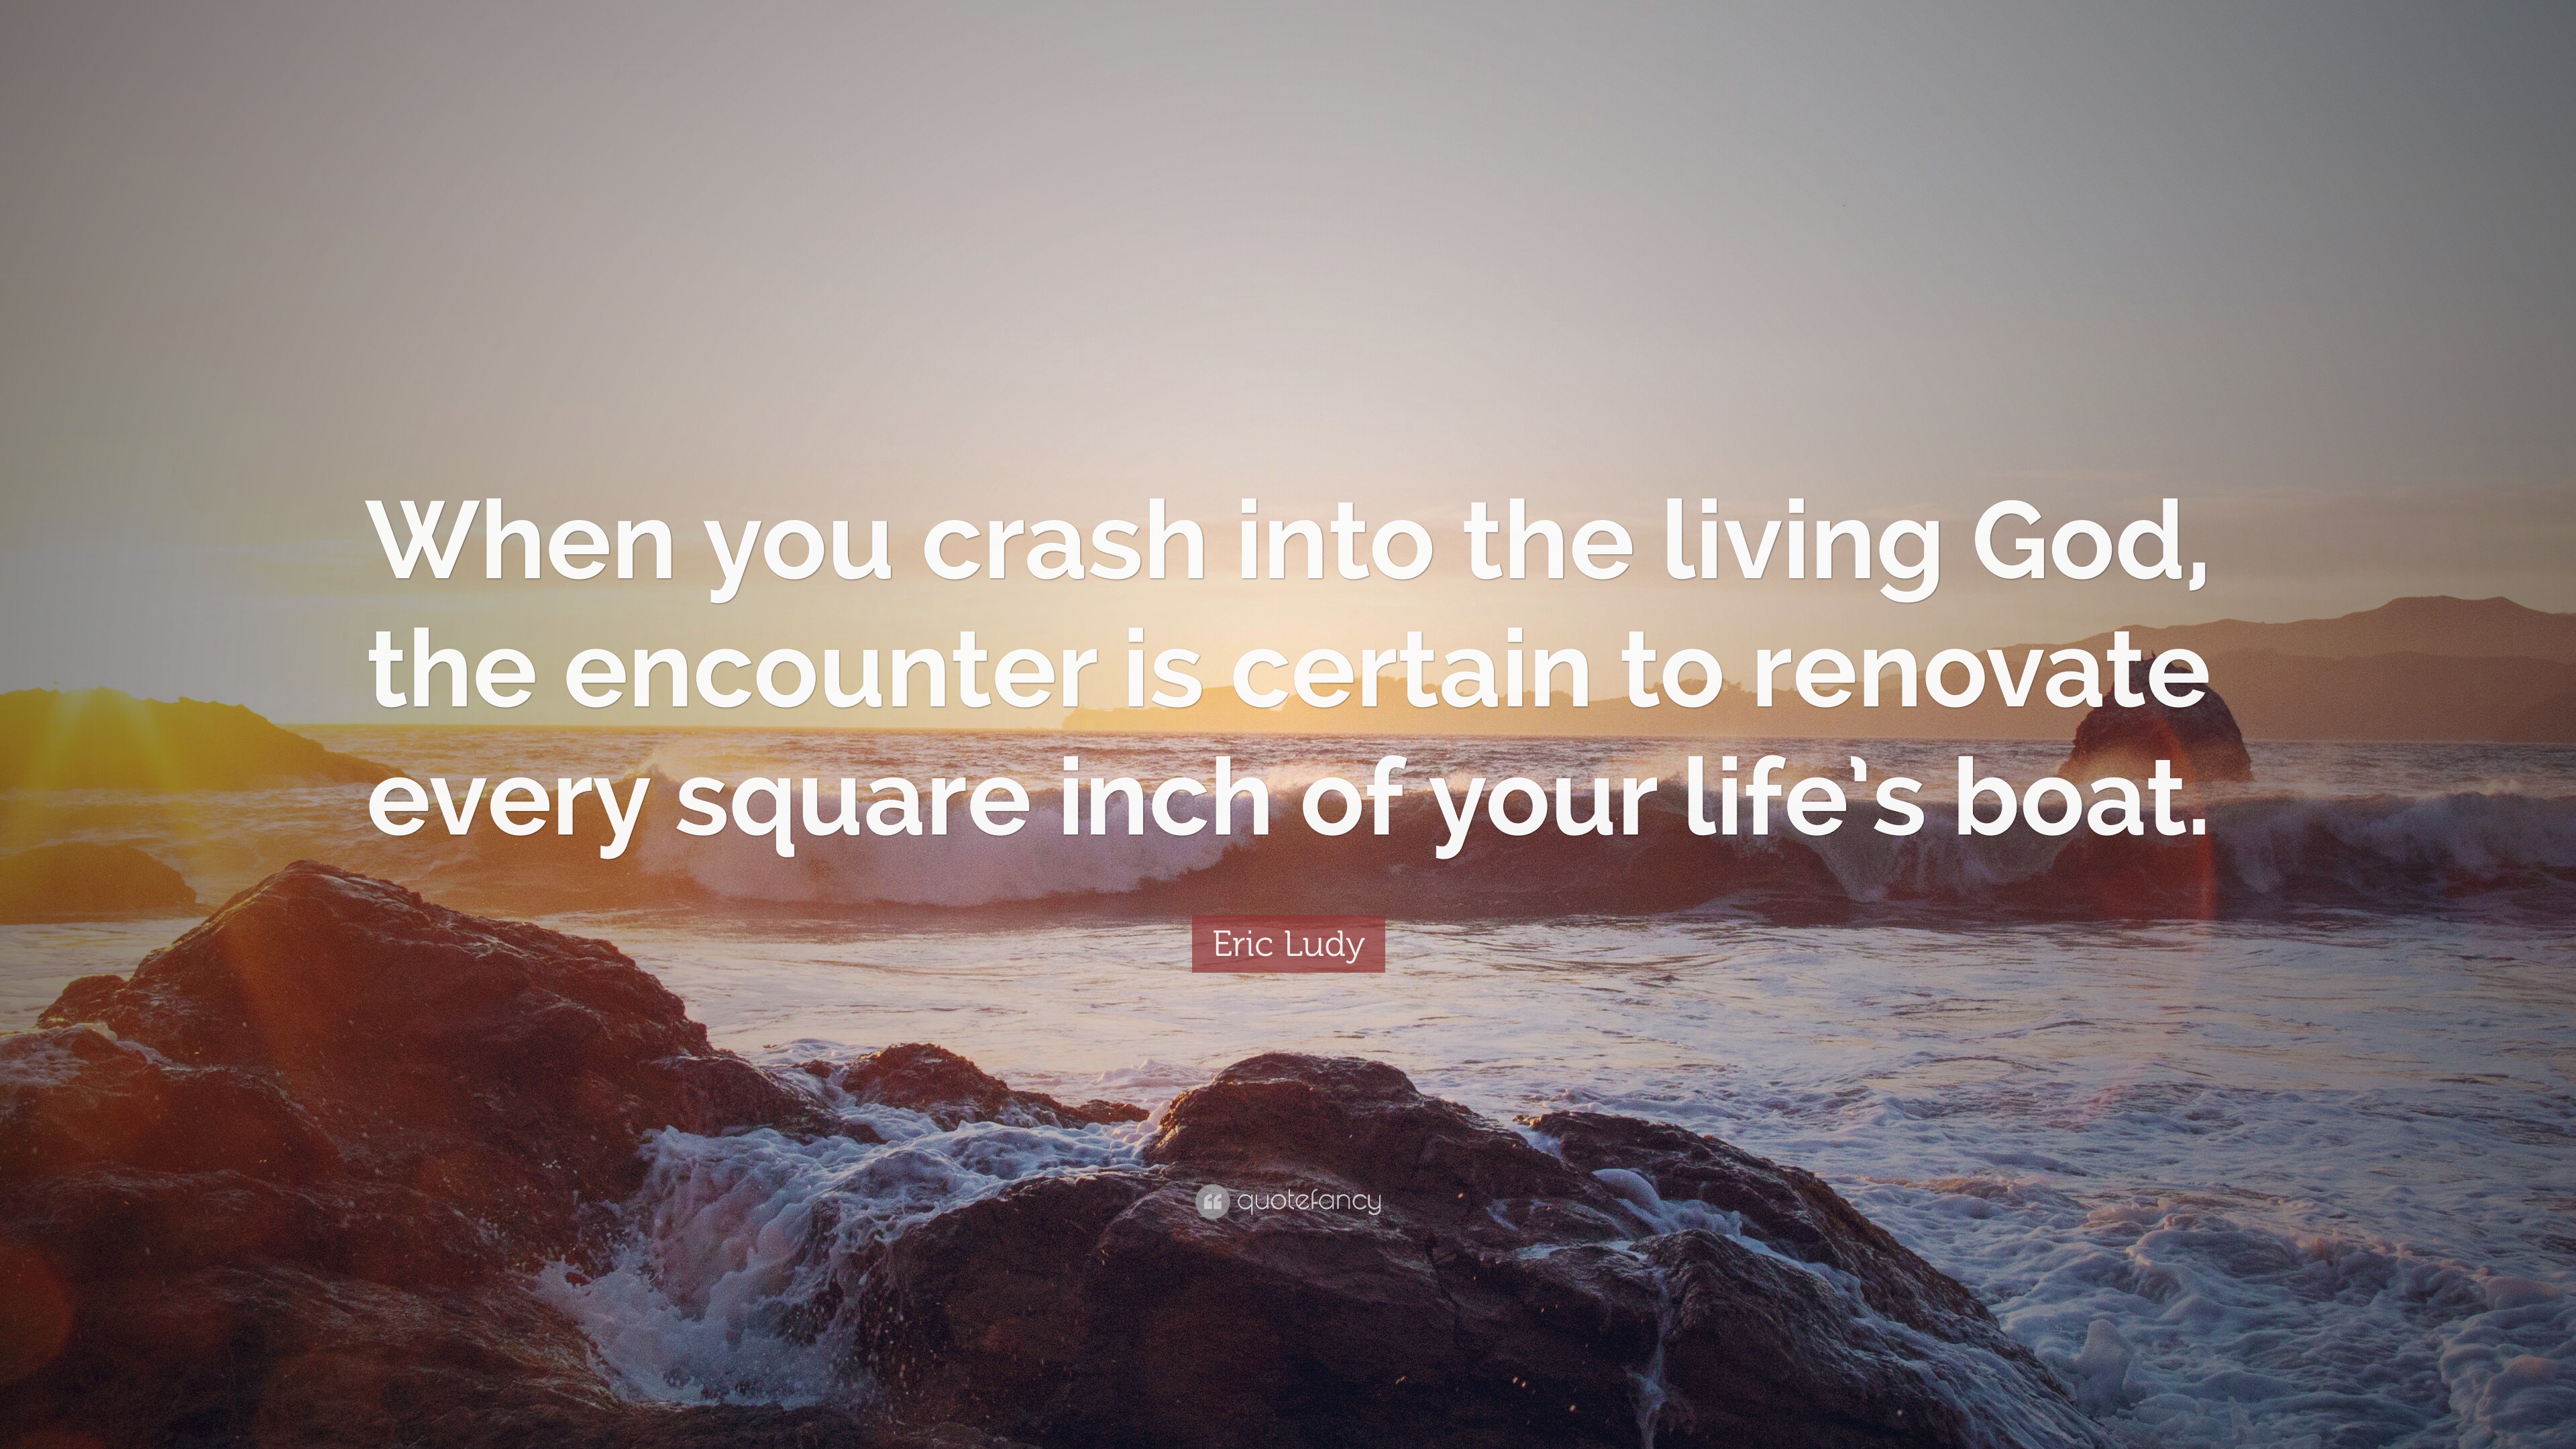 3186281-Eric-Ludy-Quote-When-you-crash-into-the-living-God-the-encounter.jpg